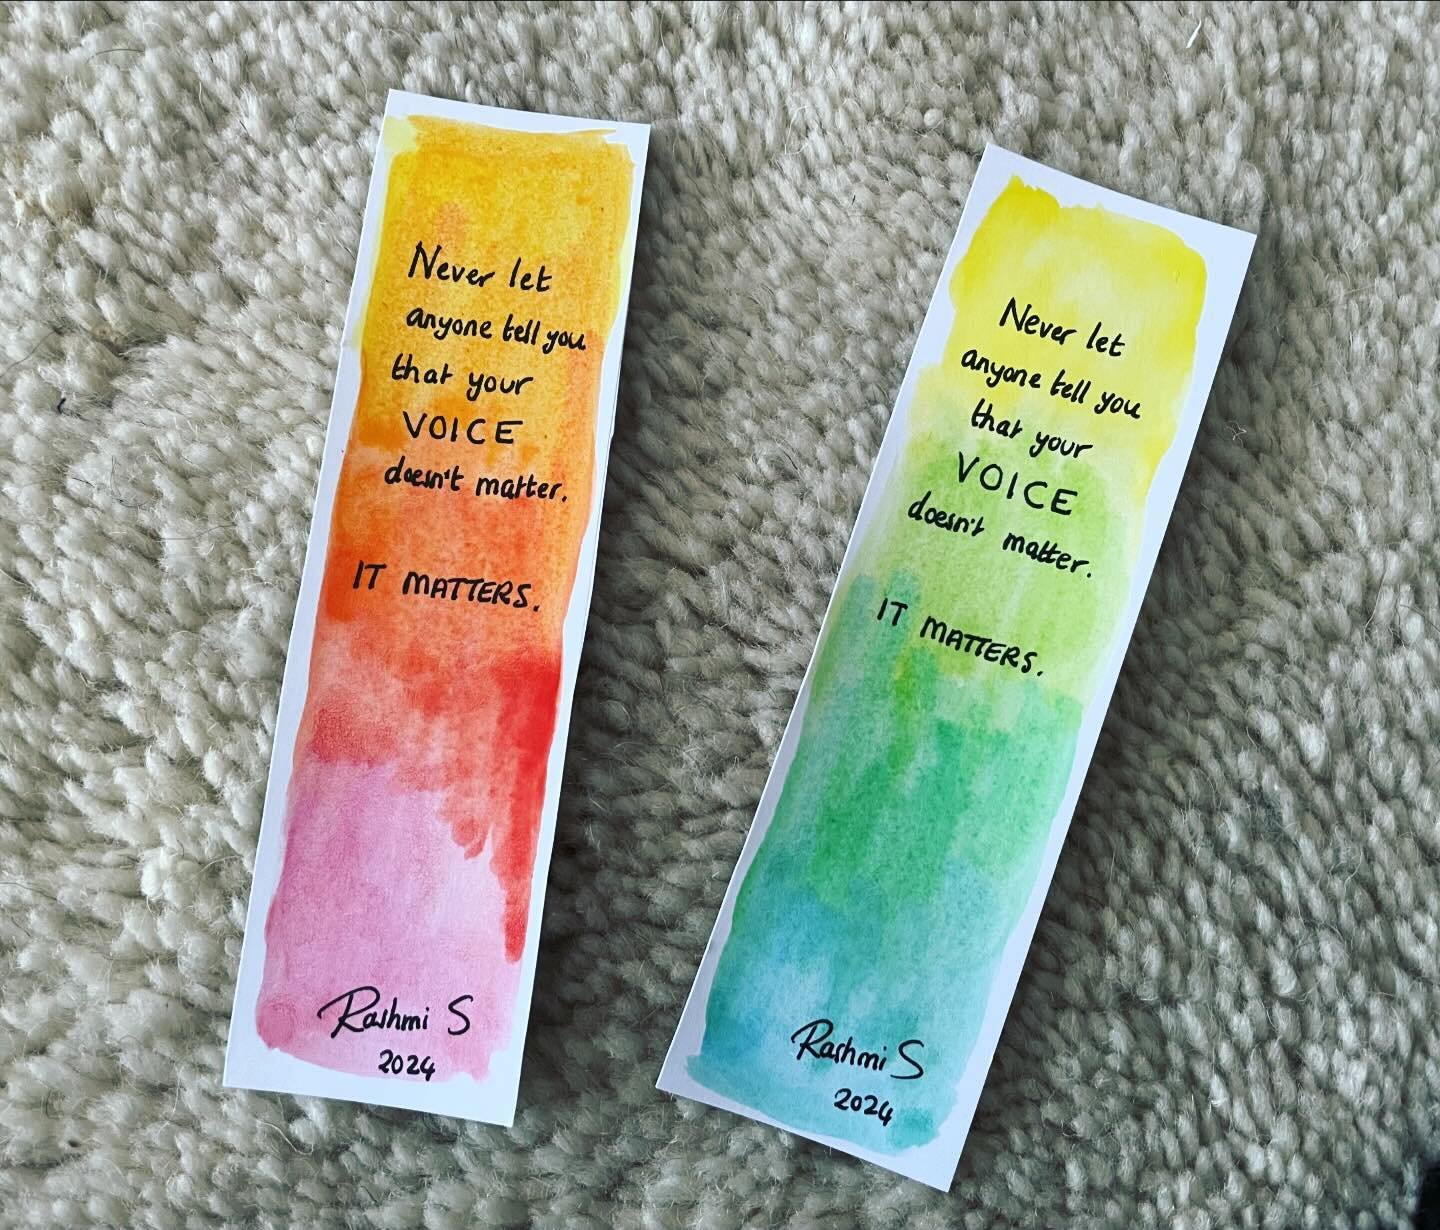 &ldquo;Never let anyone tell you that your voice doesn&rsquo;t matter. IT MATTERS.&rdquo; 💛 

Got my Bookmark Project bookmarks in at the LAST minute this year but they&rsquo;re now up as Lots 617 and 618 to raise money for Katiyo Primary School in 